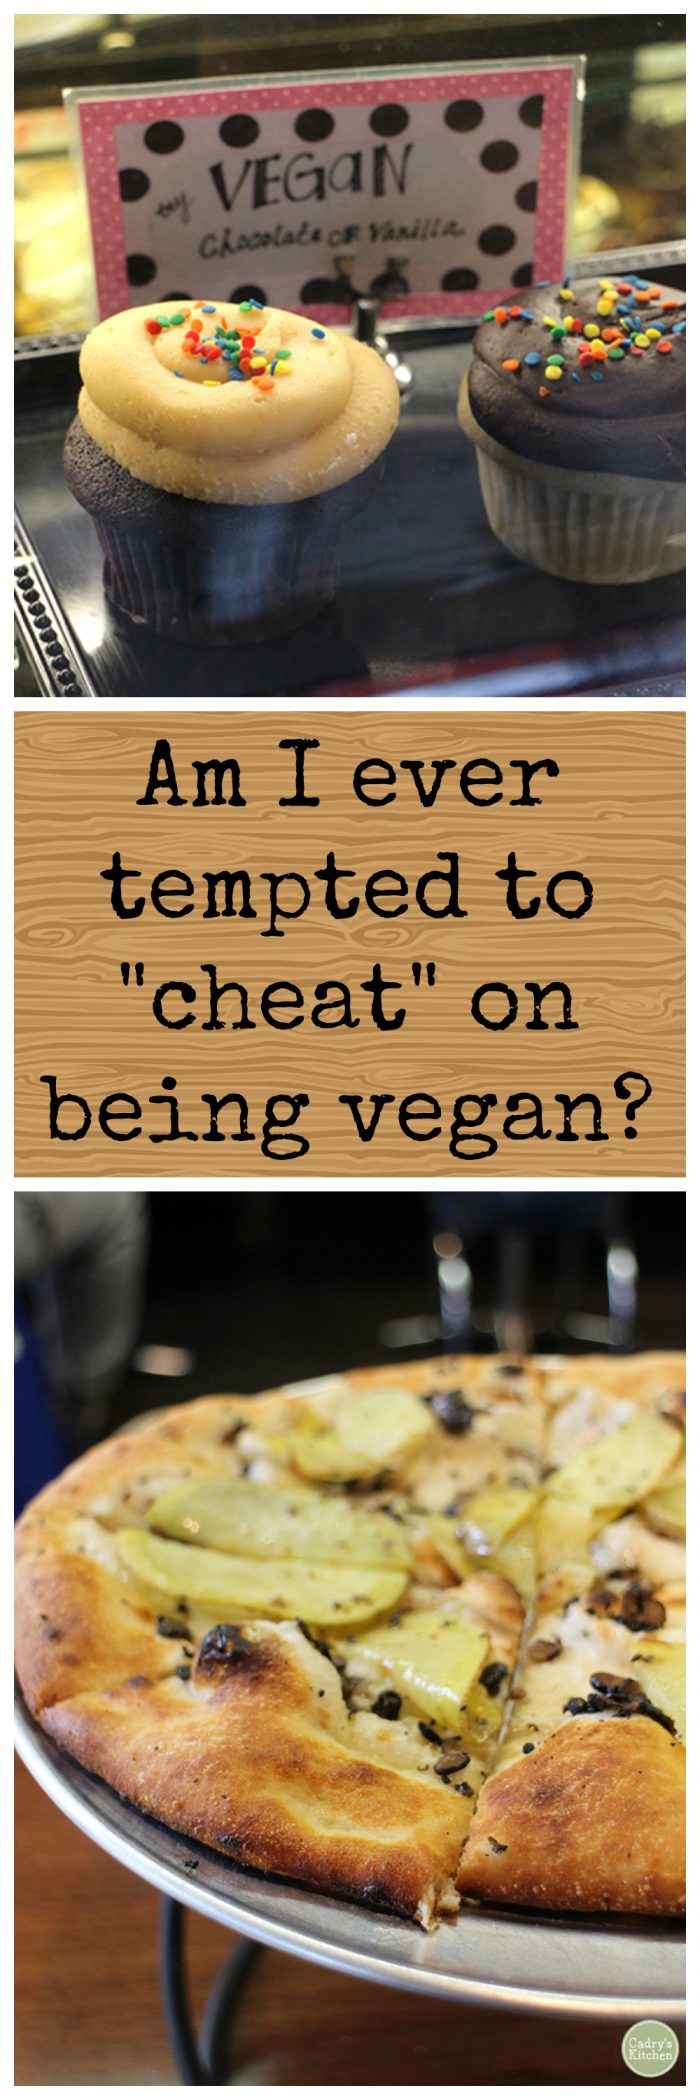 Occasionally people will ask if I'm ever tempted to "cheat" on being vegan. Here's my answer. | cadryskitchen.com